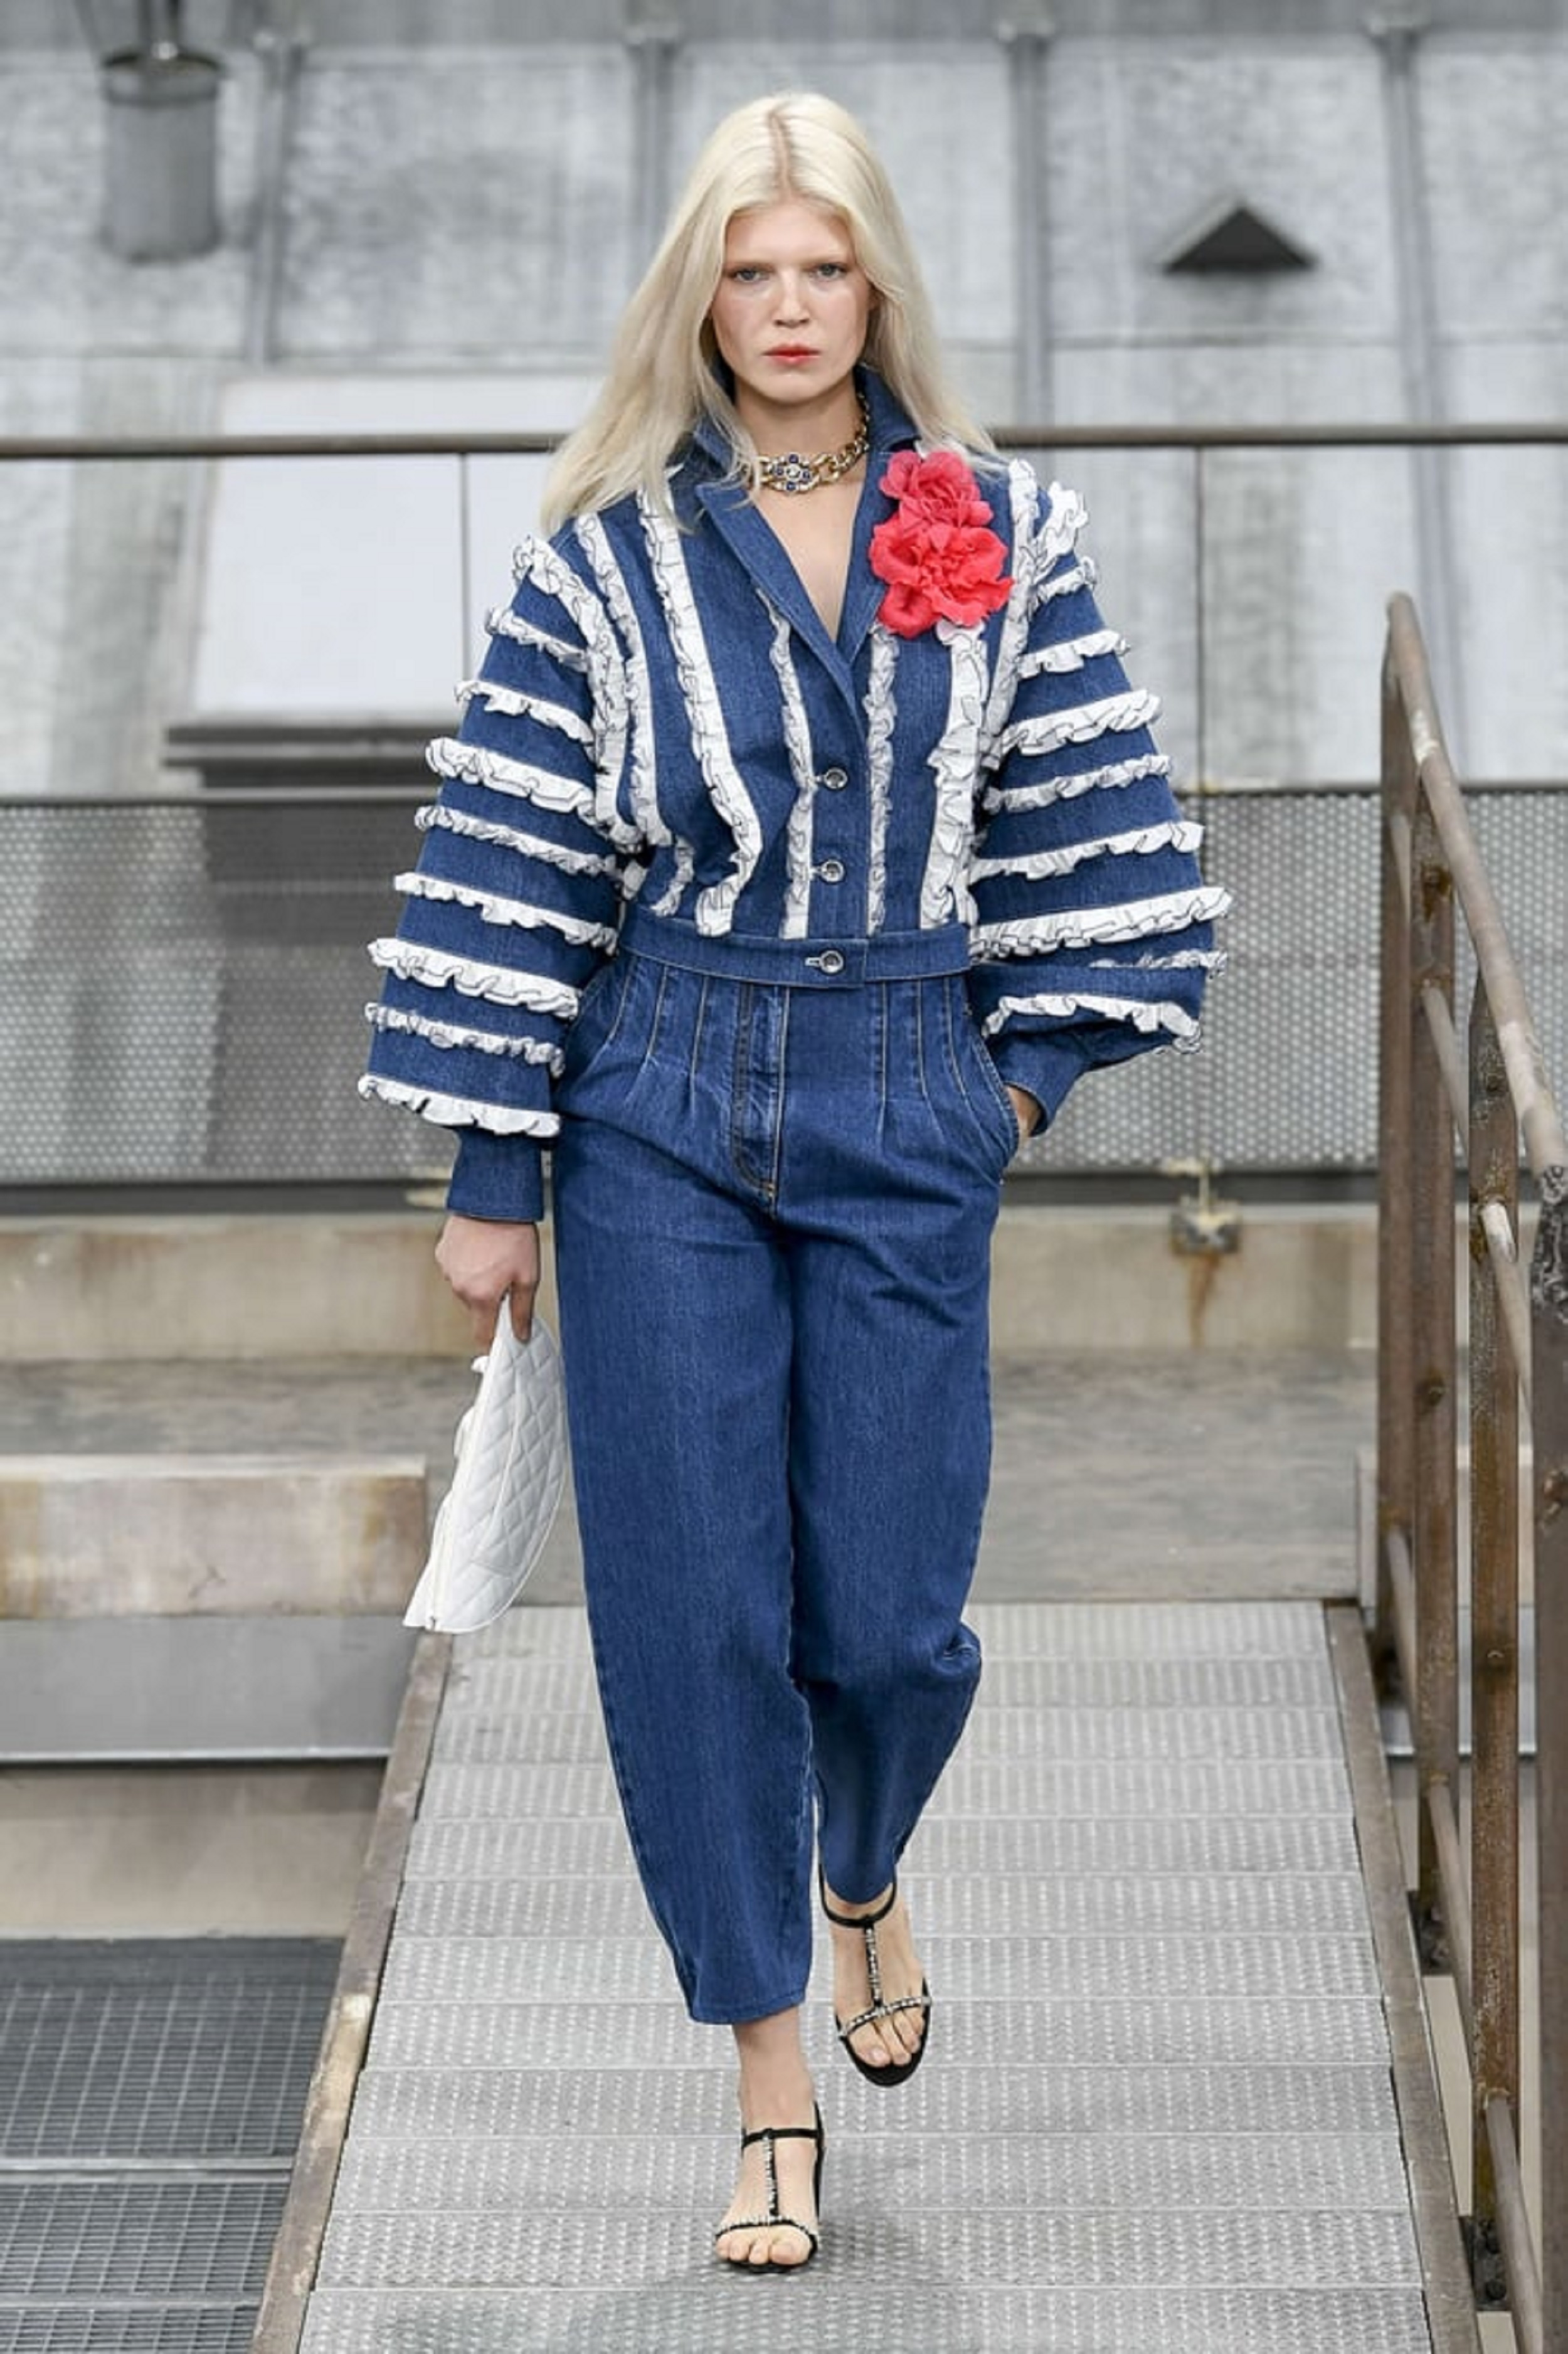 Chanel acquires 60% of FashionArt, a company specialising in denim